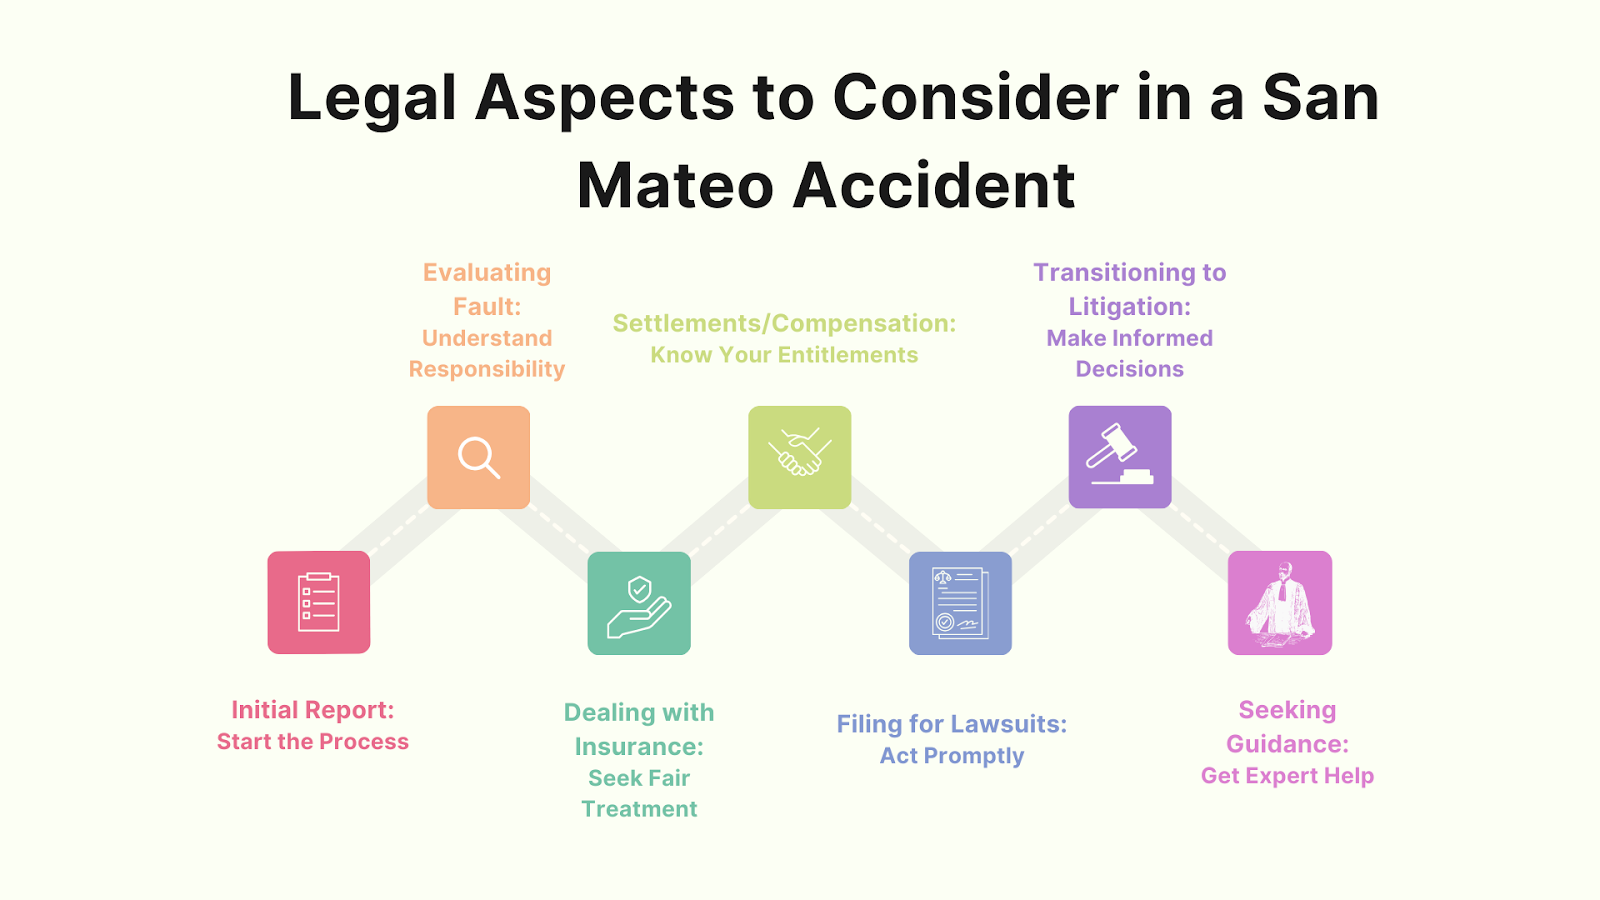 Legal Aspects to consider in San Mateo Accident